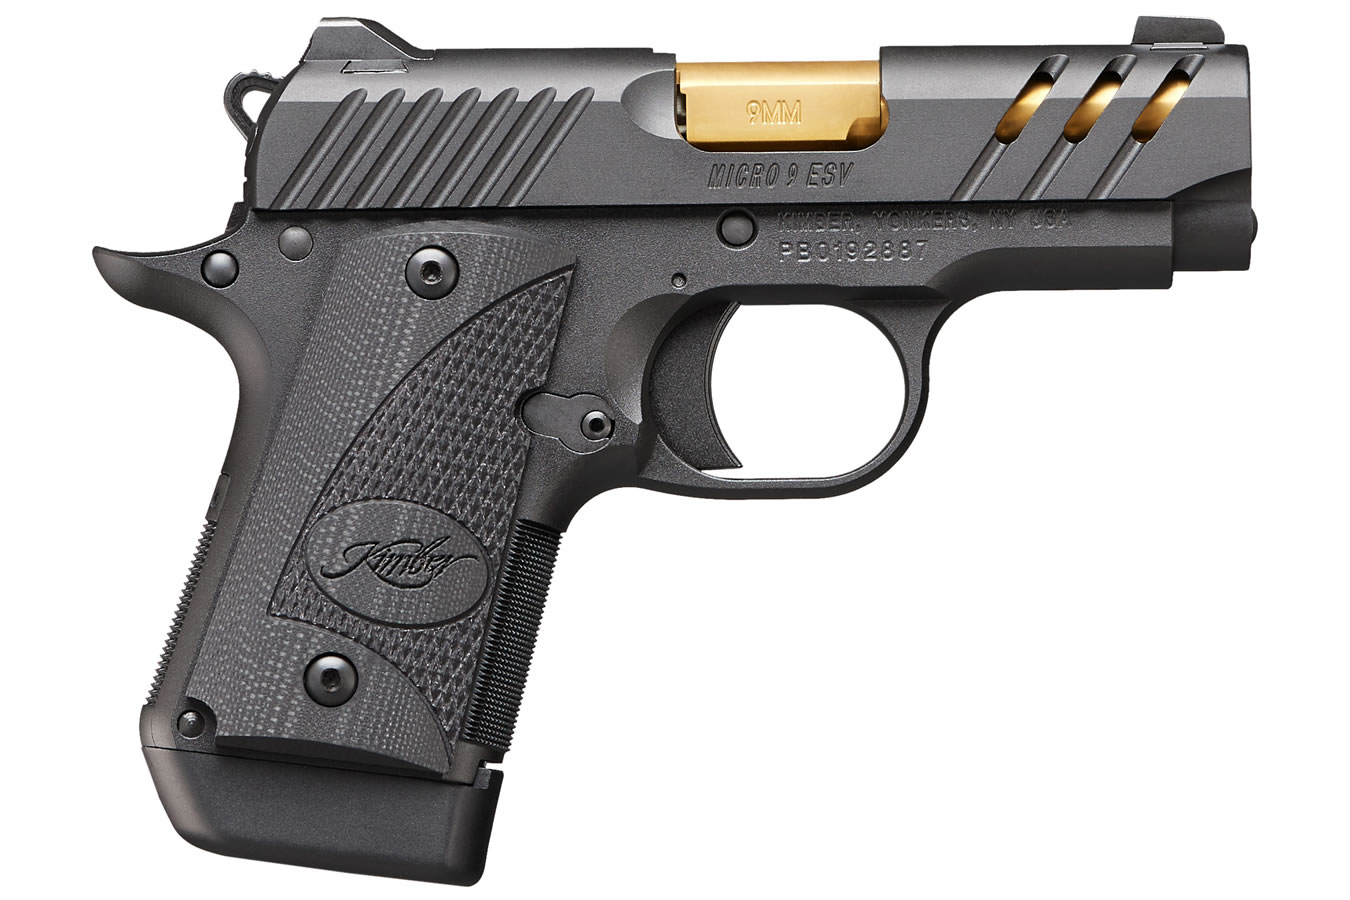 Kimber Micro 9 ESV Black 9mm Carry Conceal Pistol with Ported Slide